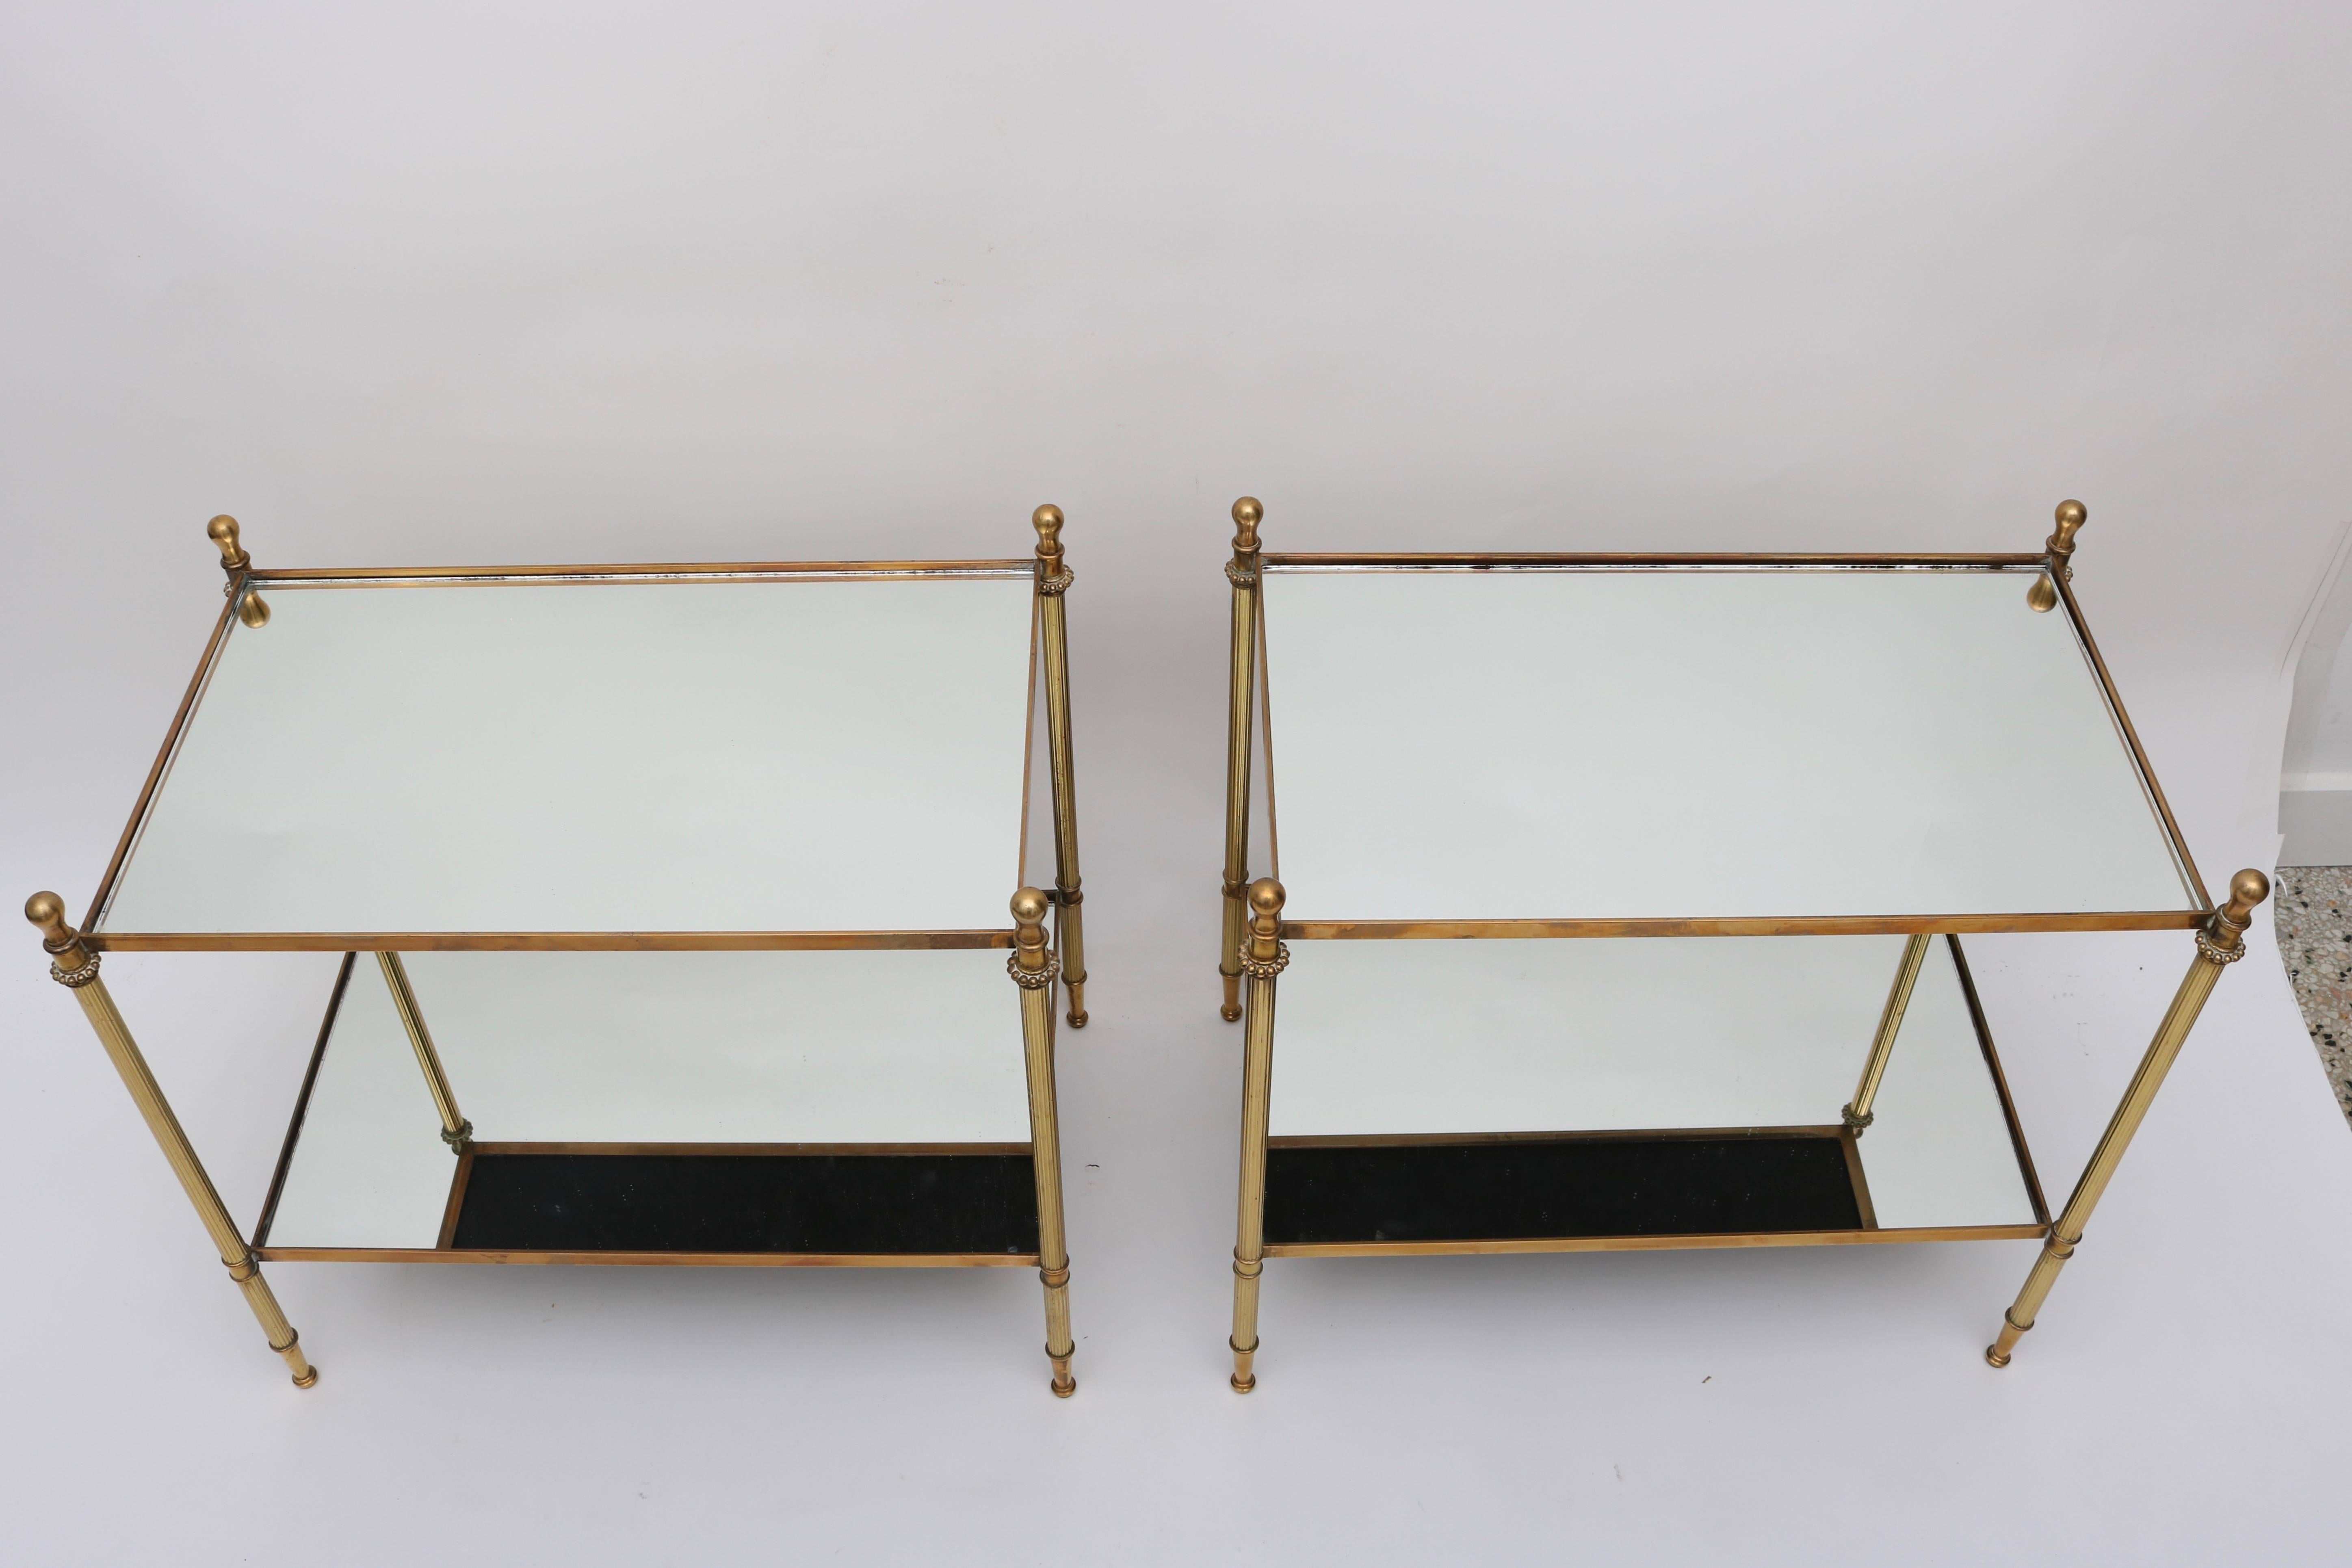 This stylish pair of side tables are very much in the style of pieces created by Maison Jansen. They are fabricated of brass and glass with fluted legs, and stylized fob finials.

For best net trade price or additional questions regarding this